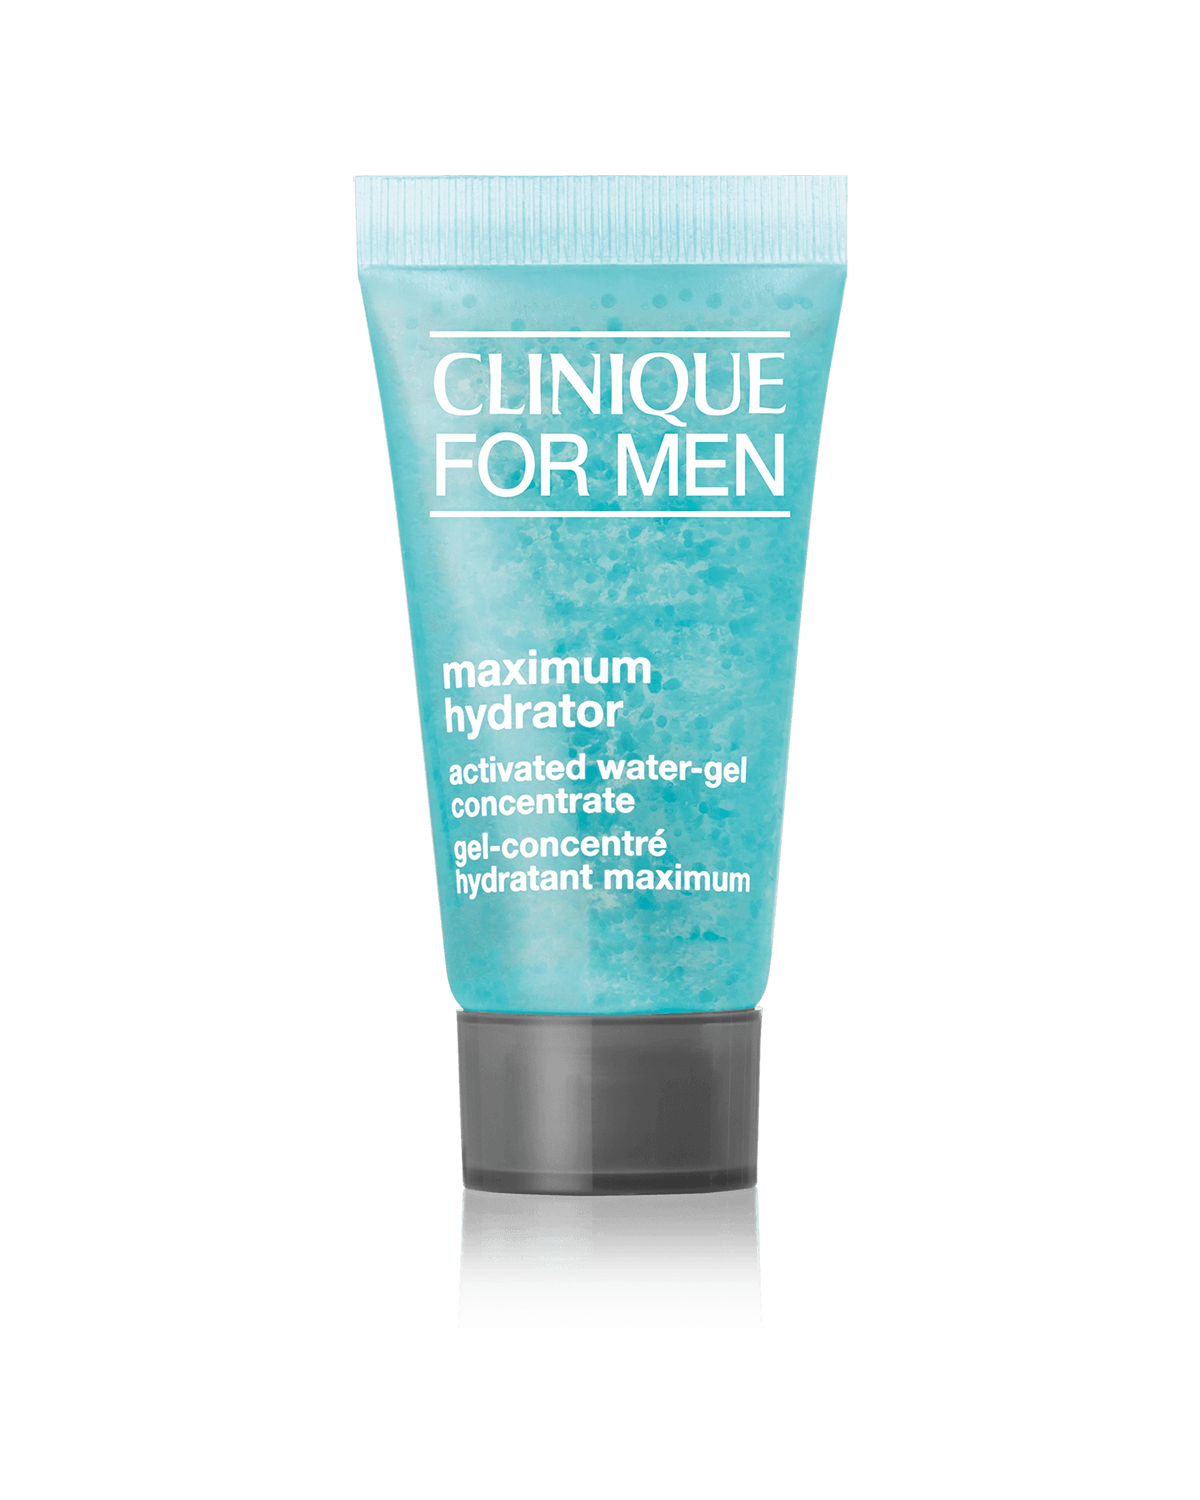 Clinique For Men Maximum Hydrator Activated Water-Gel Concentrate Mini